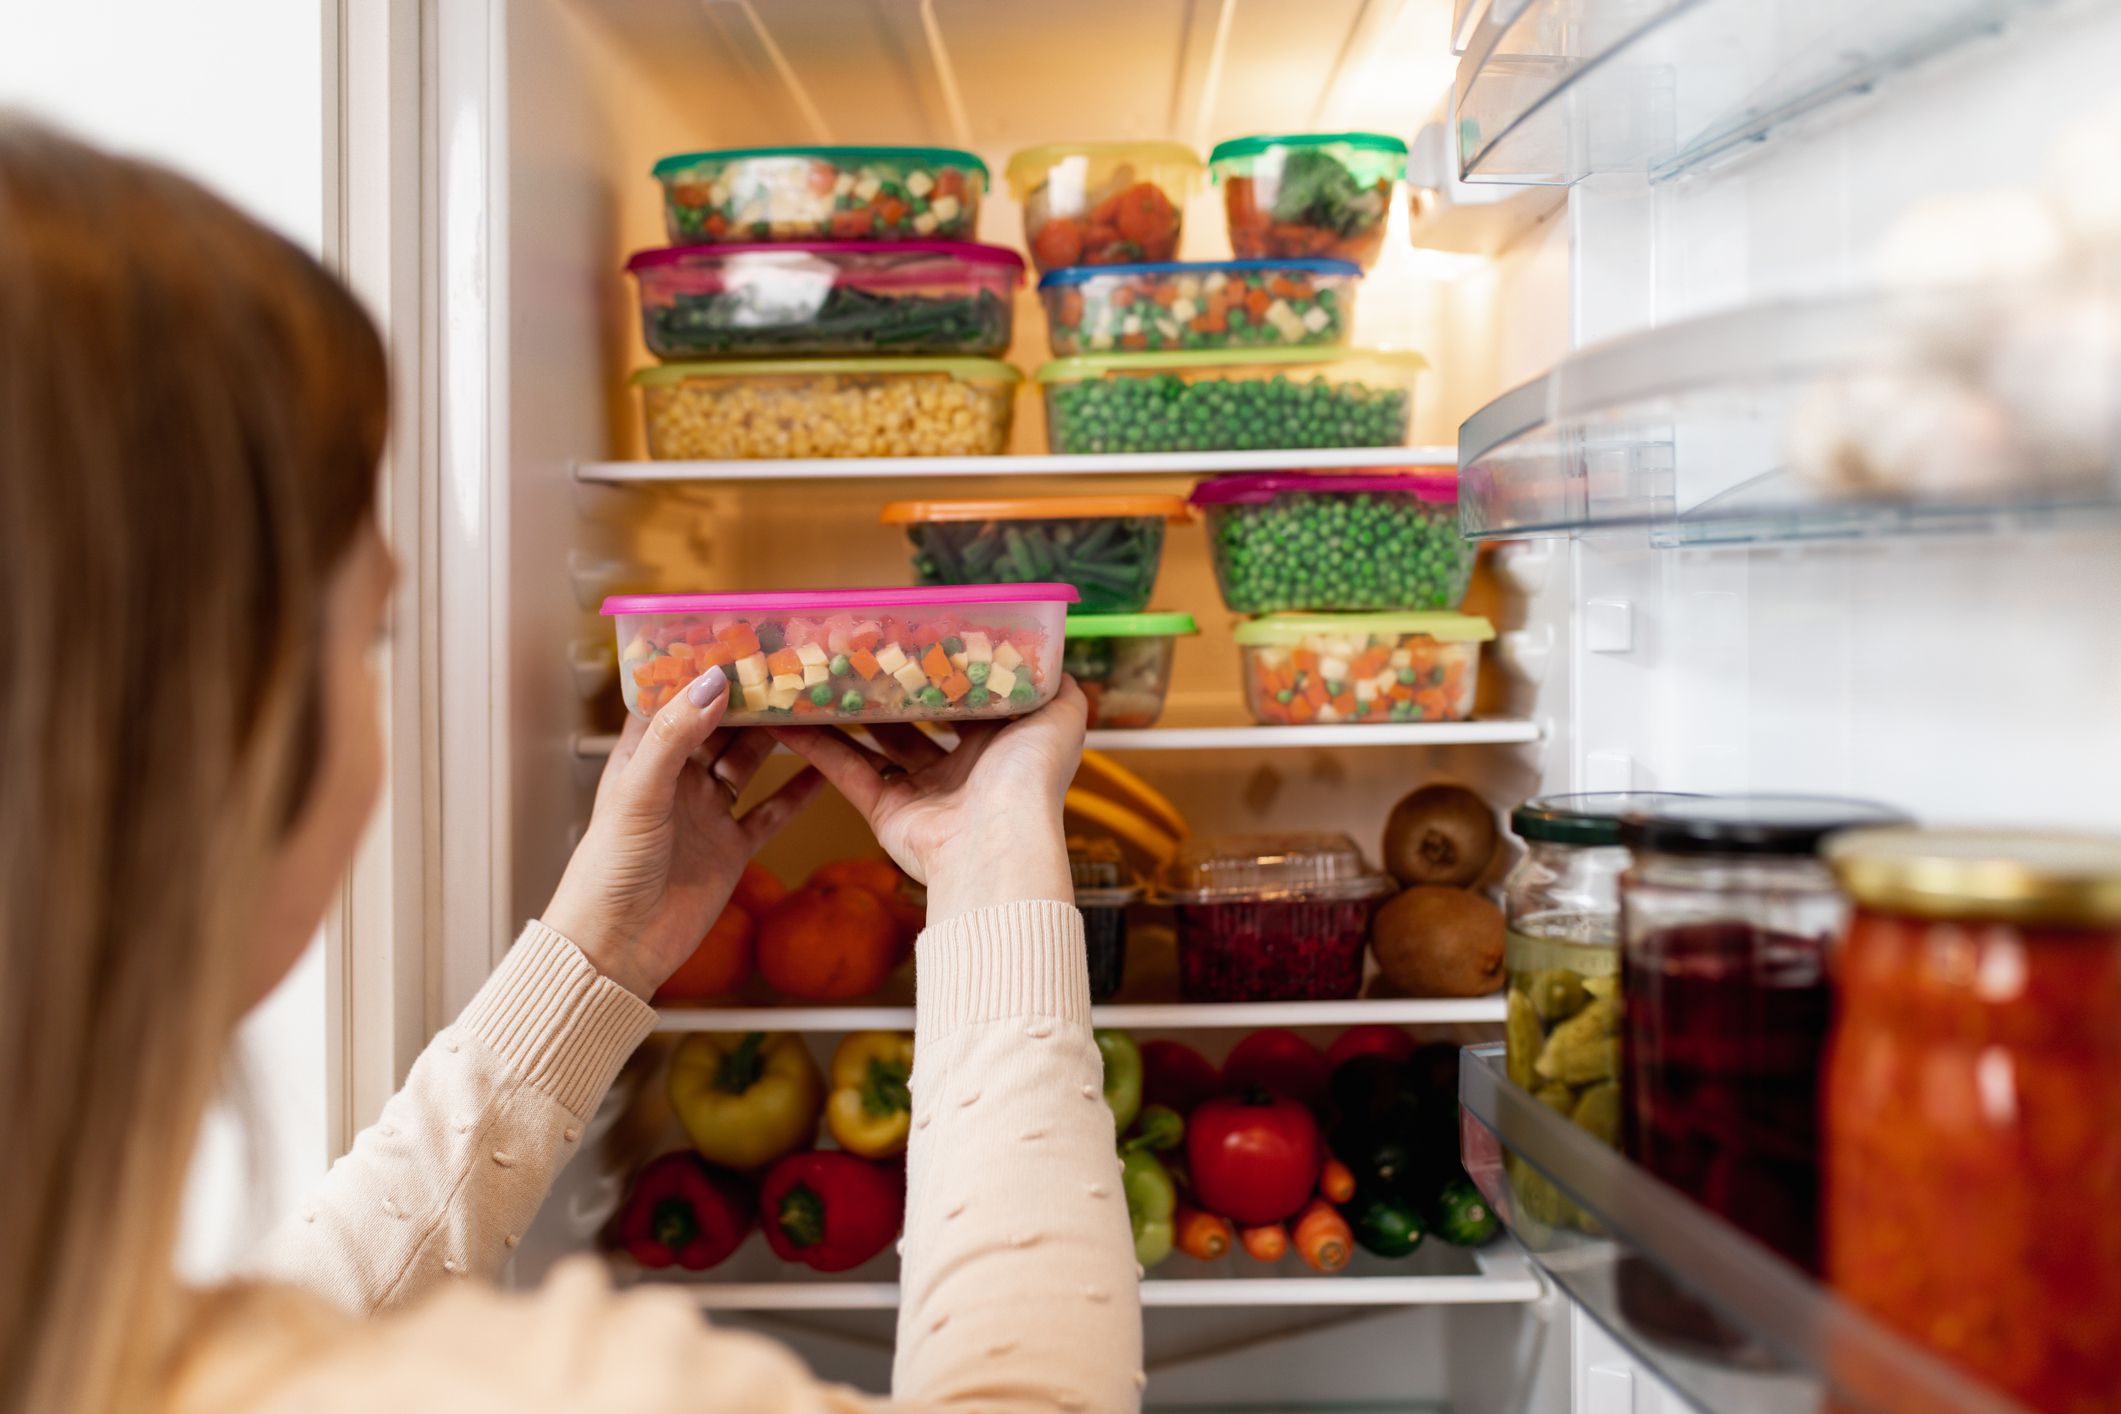 FOUR OF THE BEST FREEZER STORAGE CONTENTS FOR FROZEN FOODS